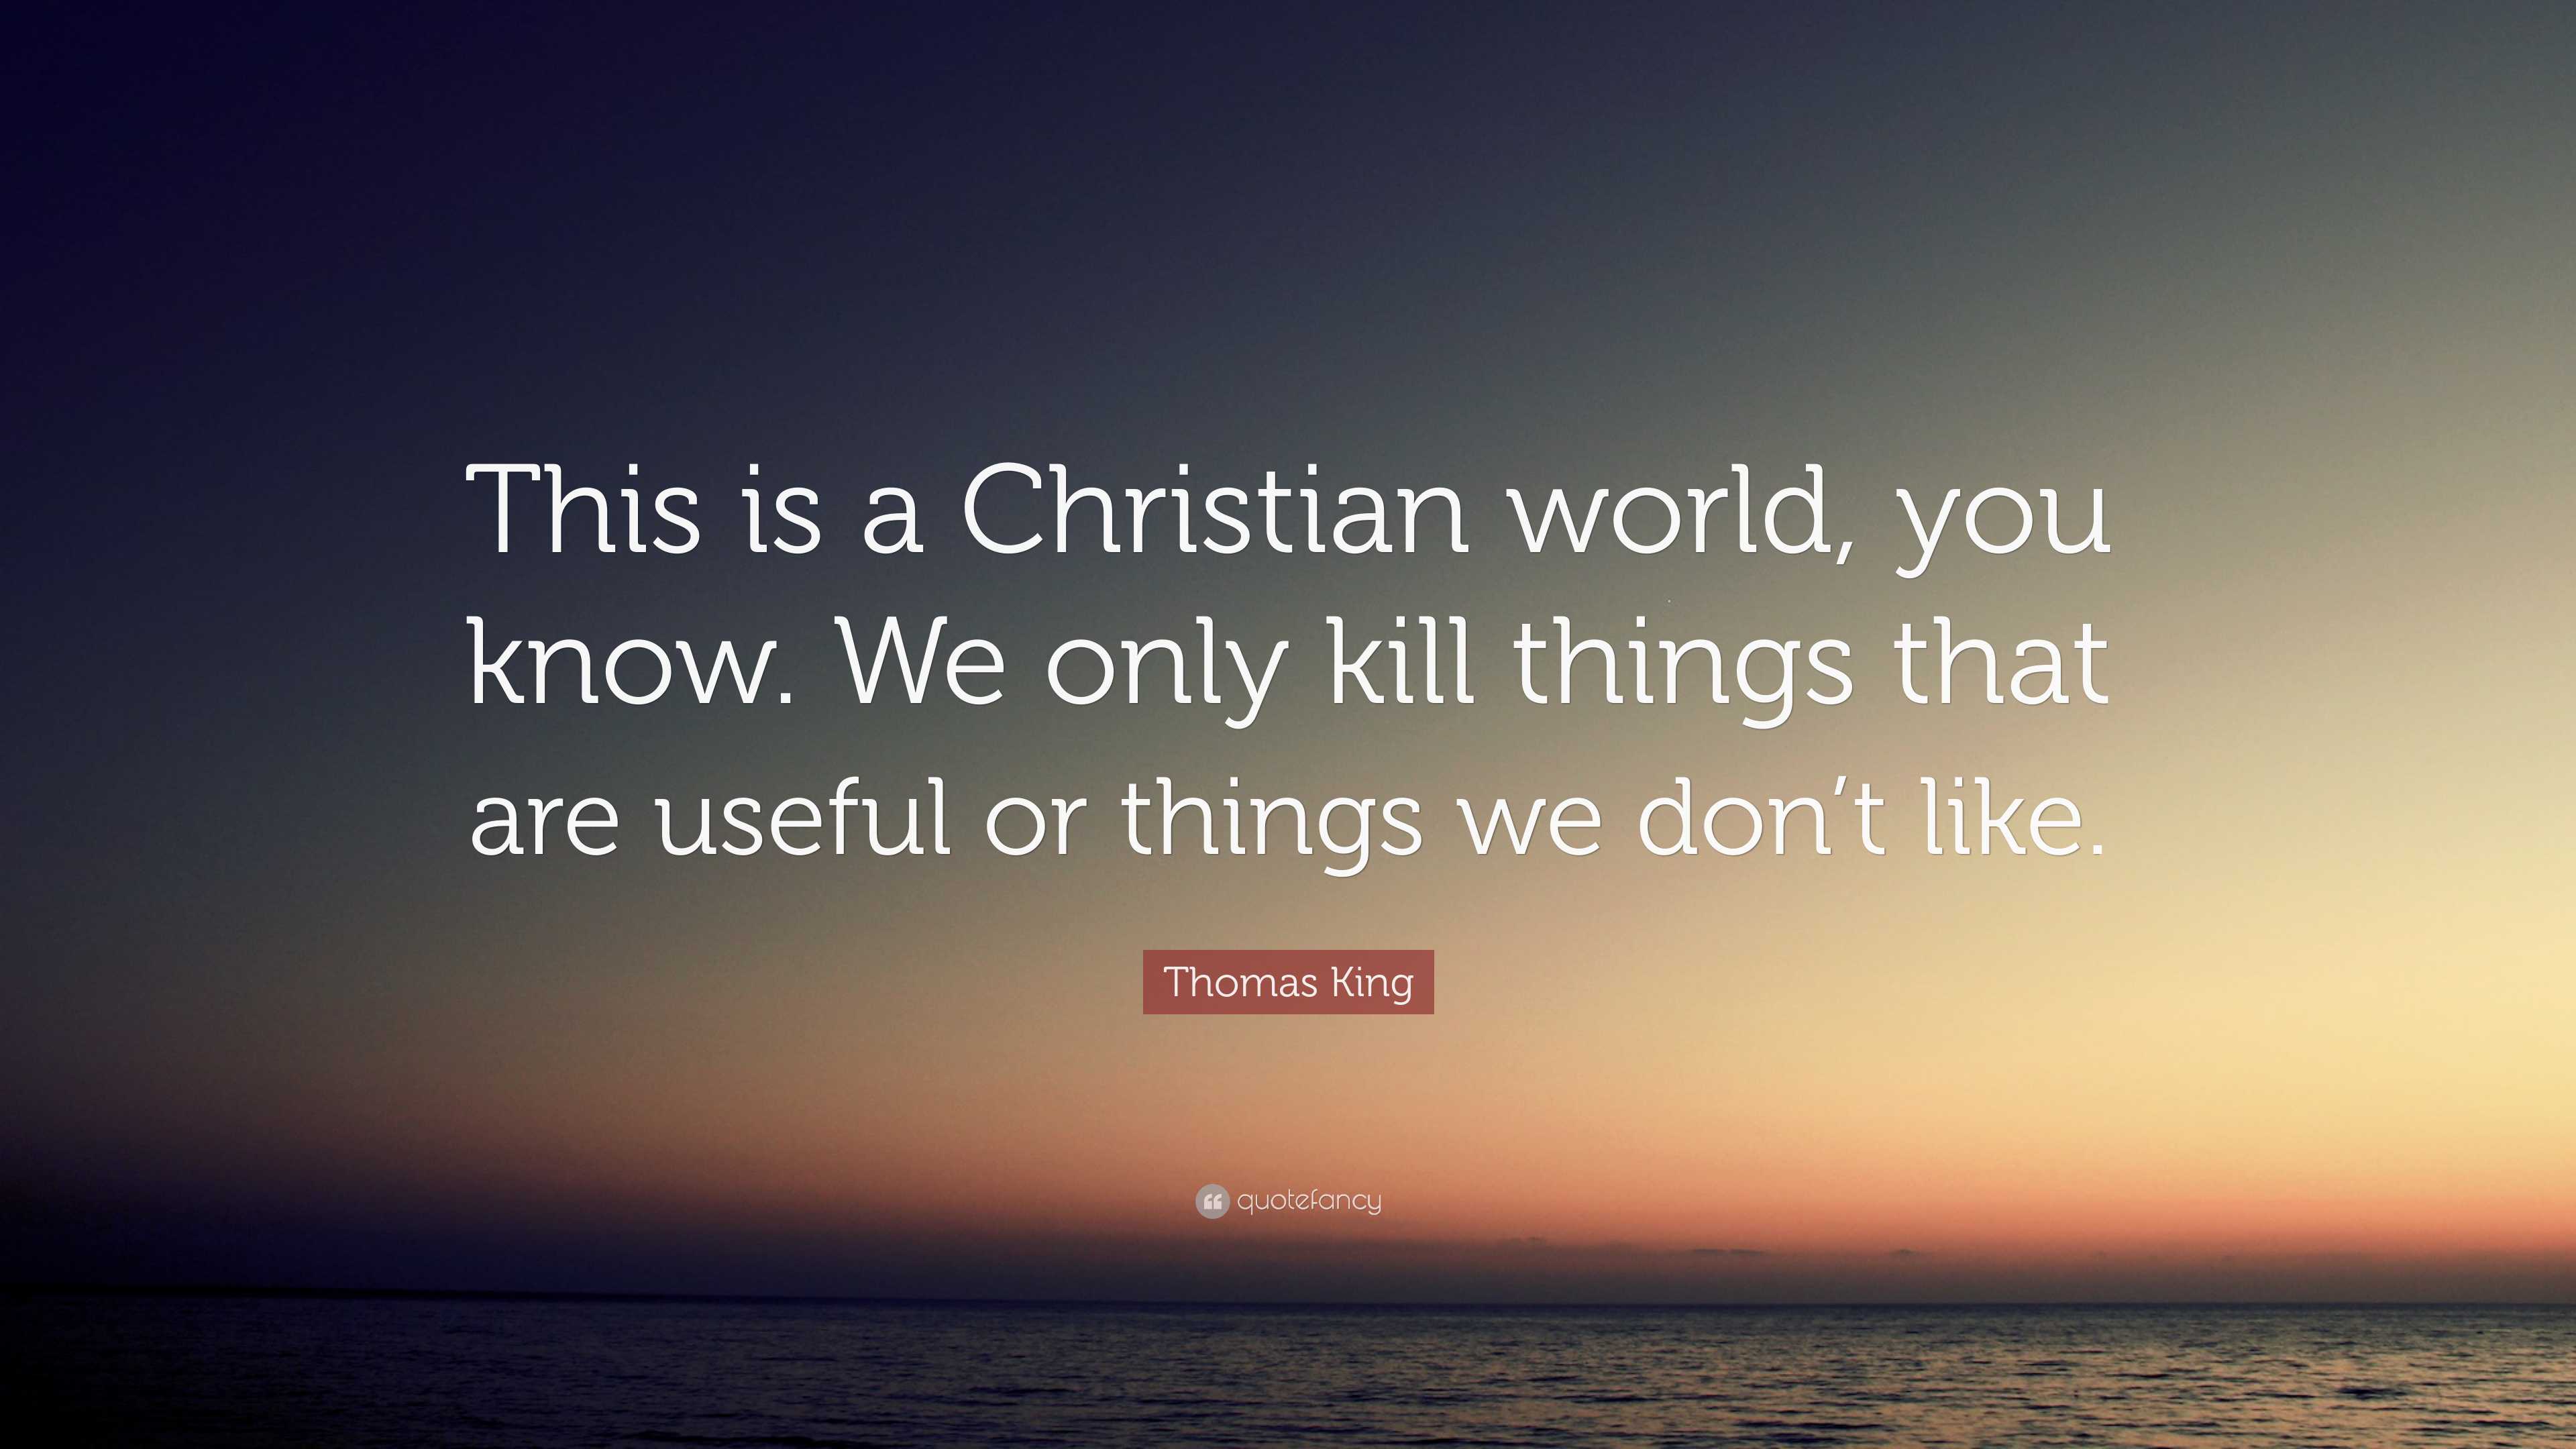 Thomas King Quote: “This is a Christian world, you know. We only kill things  that are